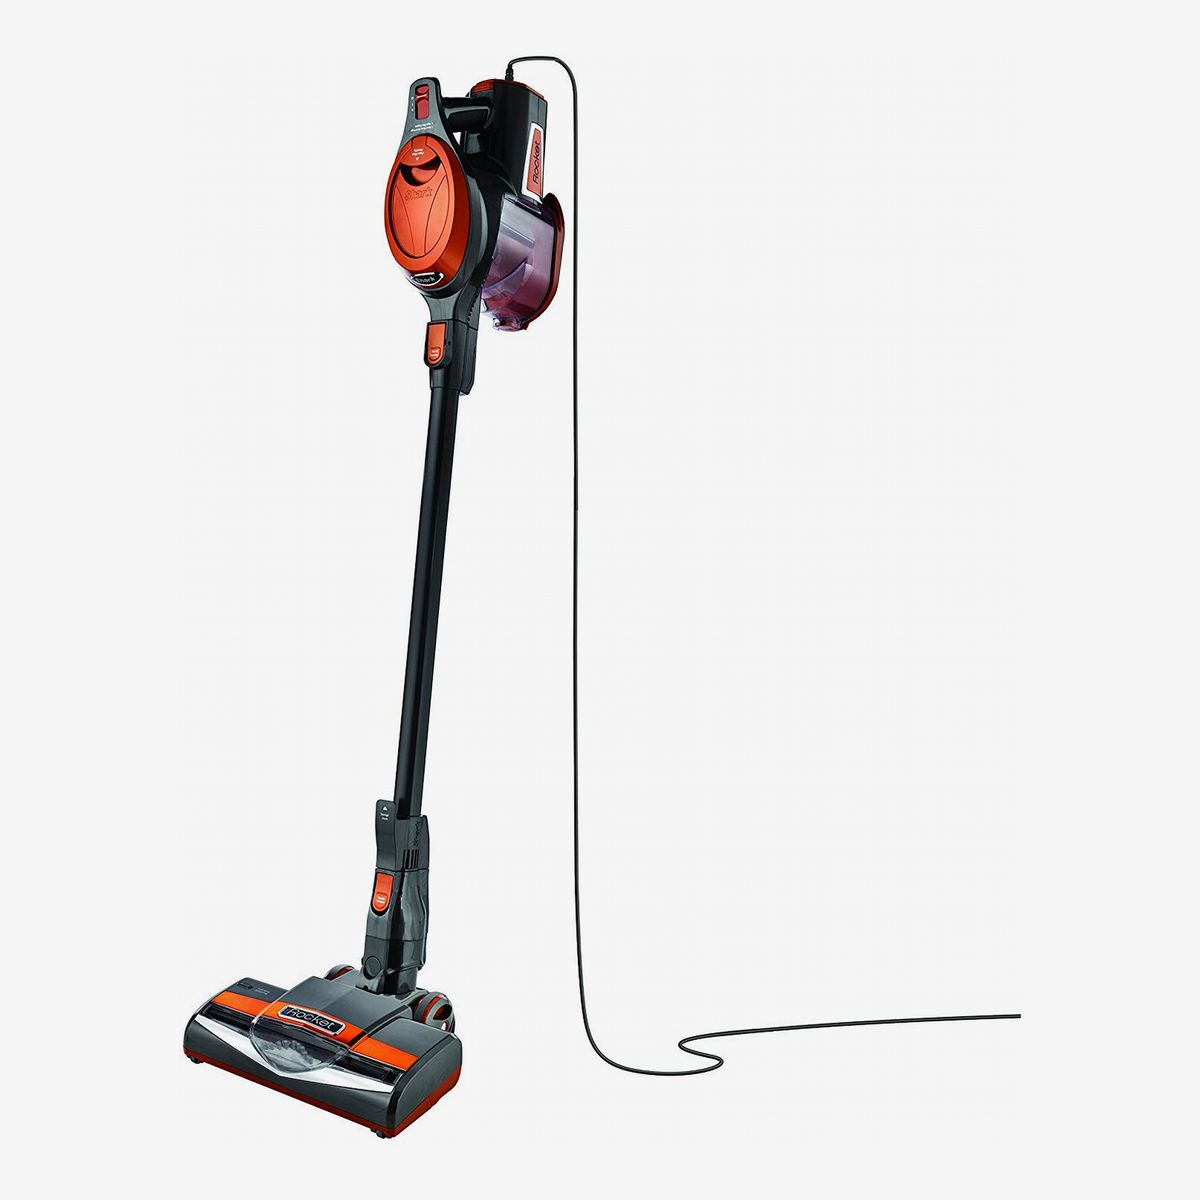 18 Best Vacuums For Pet Hair 2021 The, Best Vacuum For Pet Hair On Hardwood Floors And Carpet